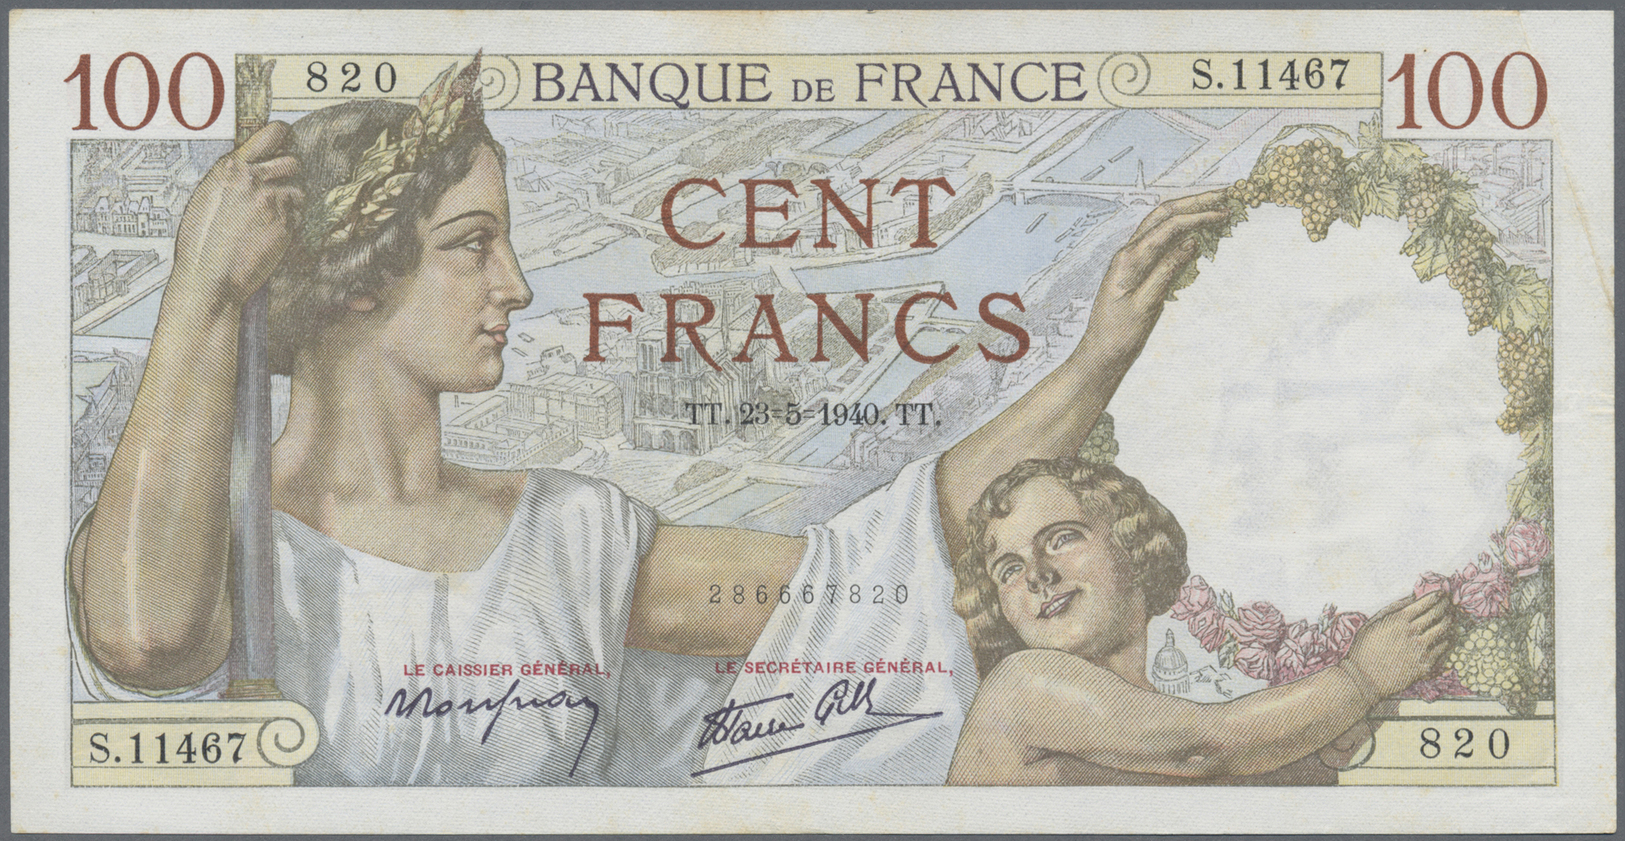 03547 France / Frankreich: set of 4 banknotes containing 100 Francs 1940 and 50, 100, 200 Francs around 1995, P. 94, 157